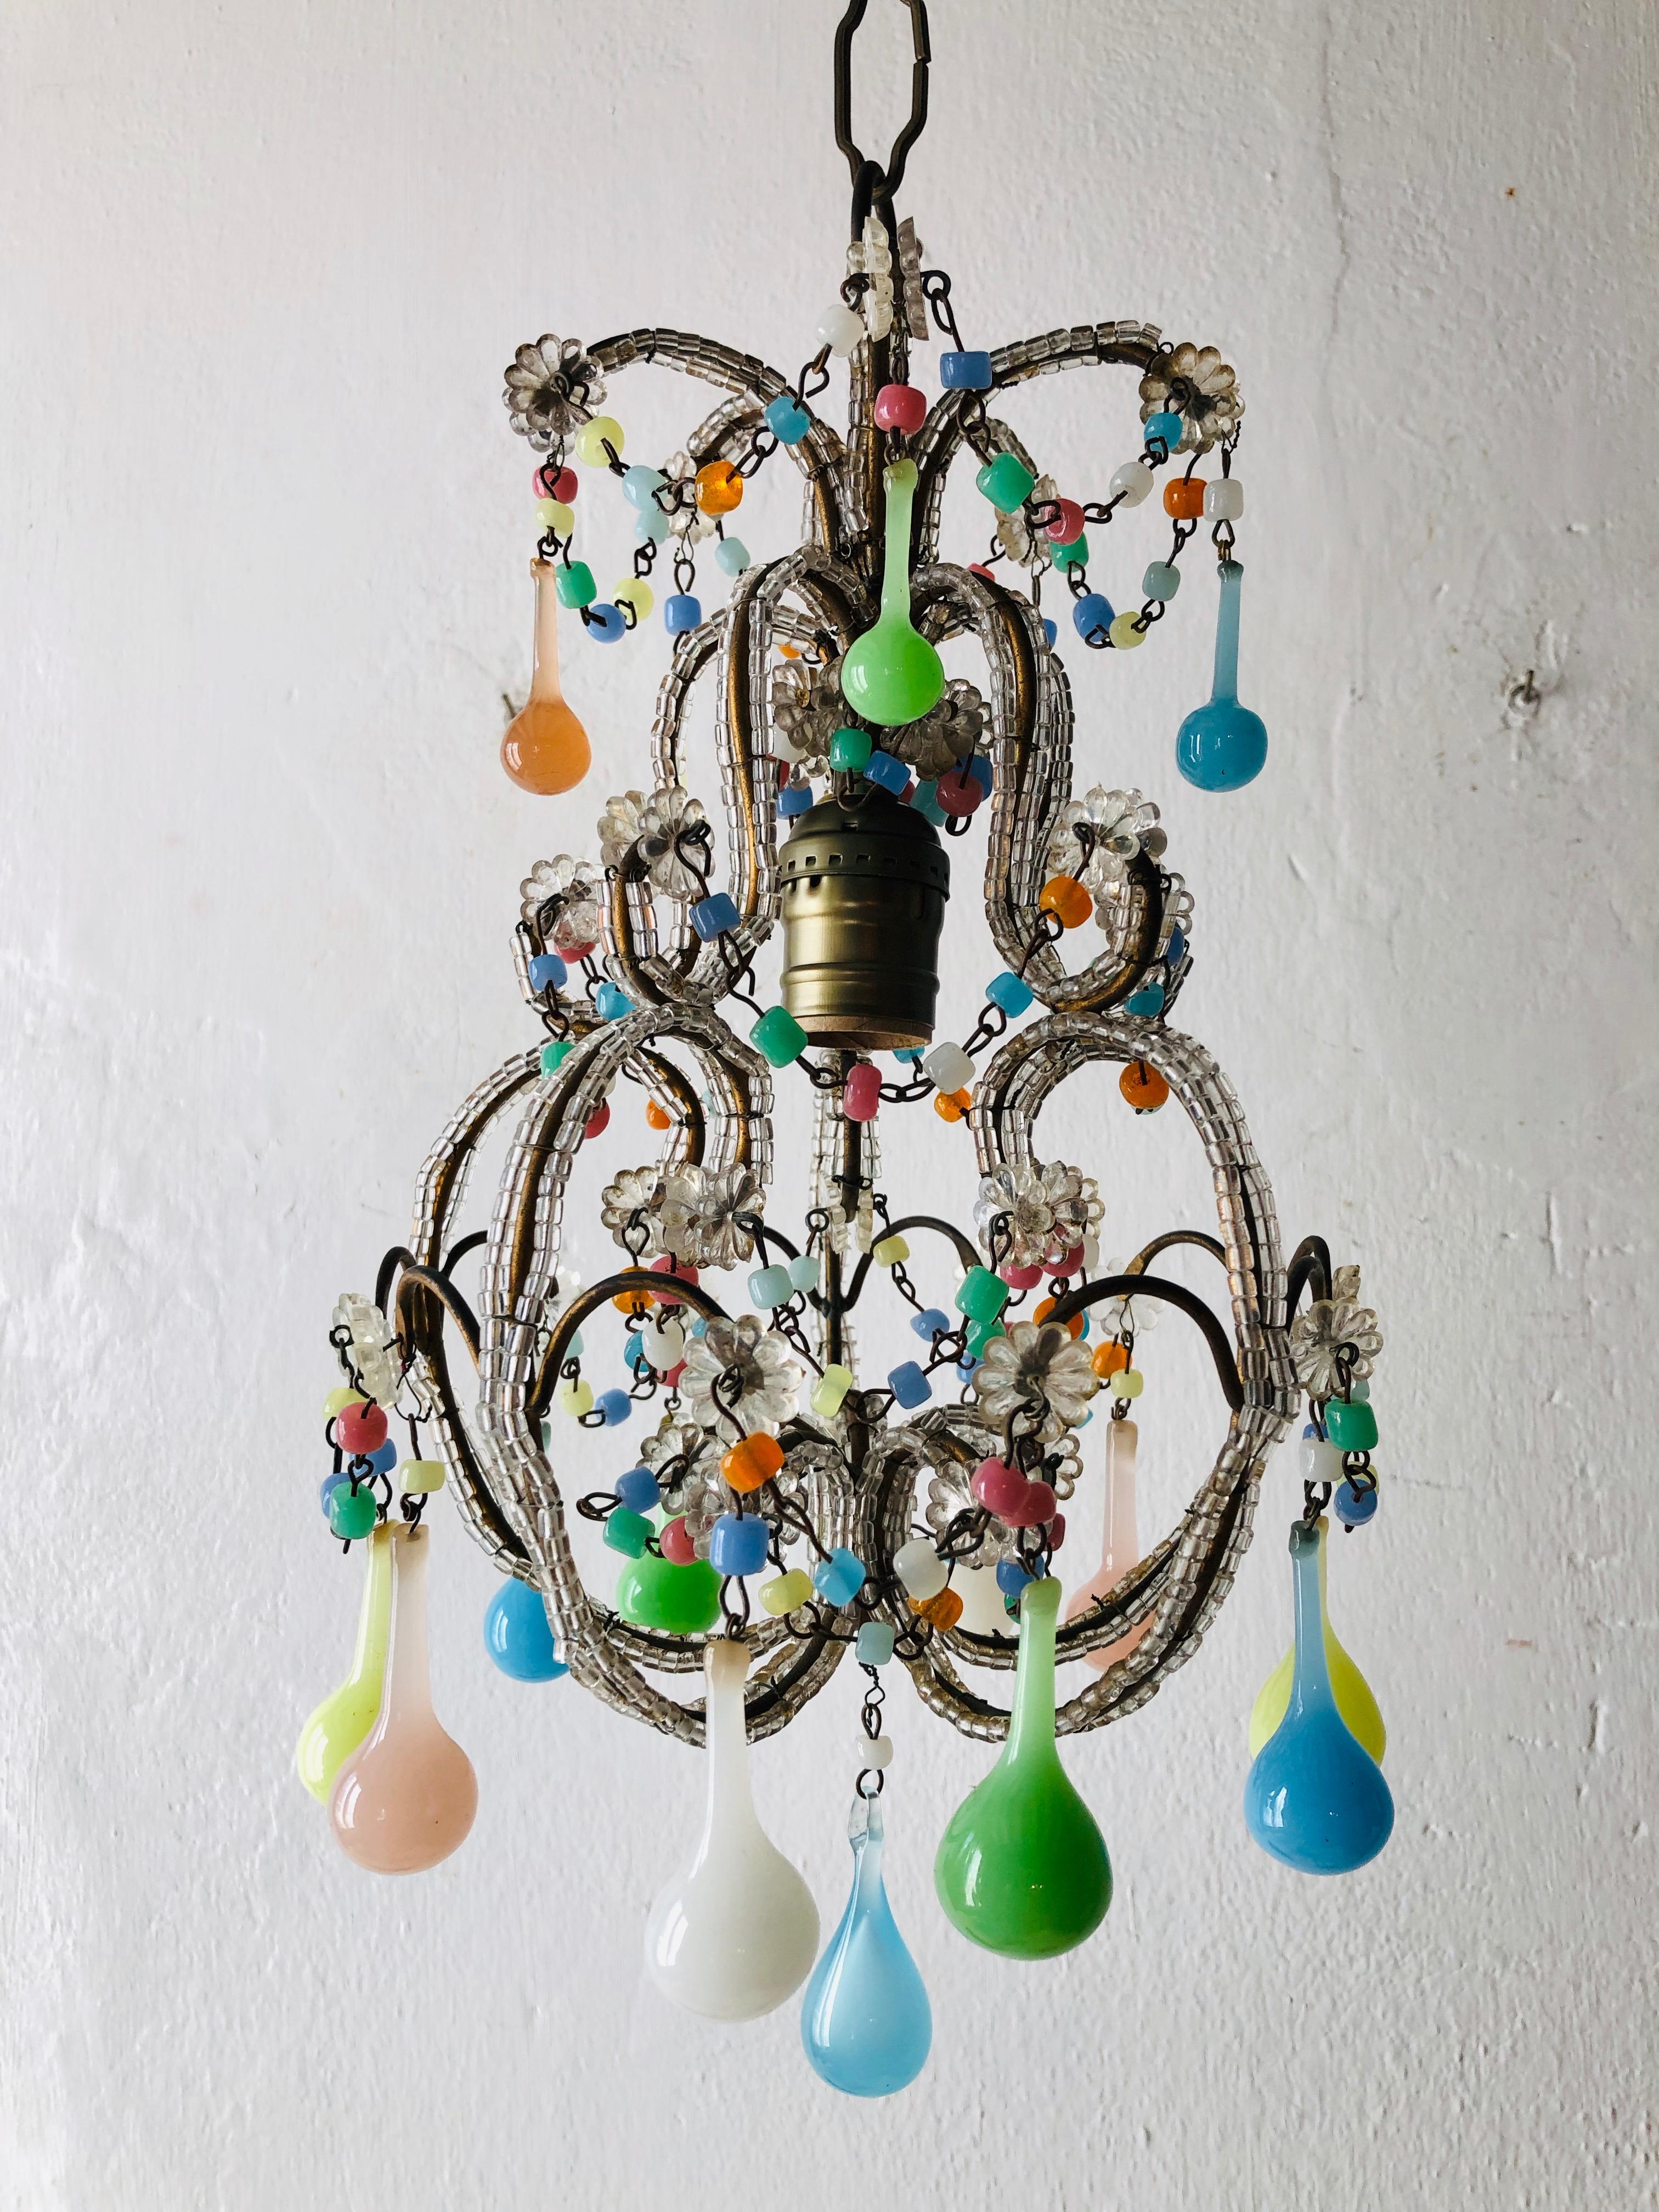 Housing one light in centre. Rewired and ready to hang. Double beading throughout. Adorning swags of opaline beads and 2 sizes of opaline drops in the colors of green, pink, blue, purple, white and yellow. Adding another 9 inches of original chain